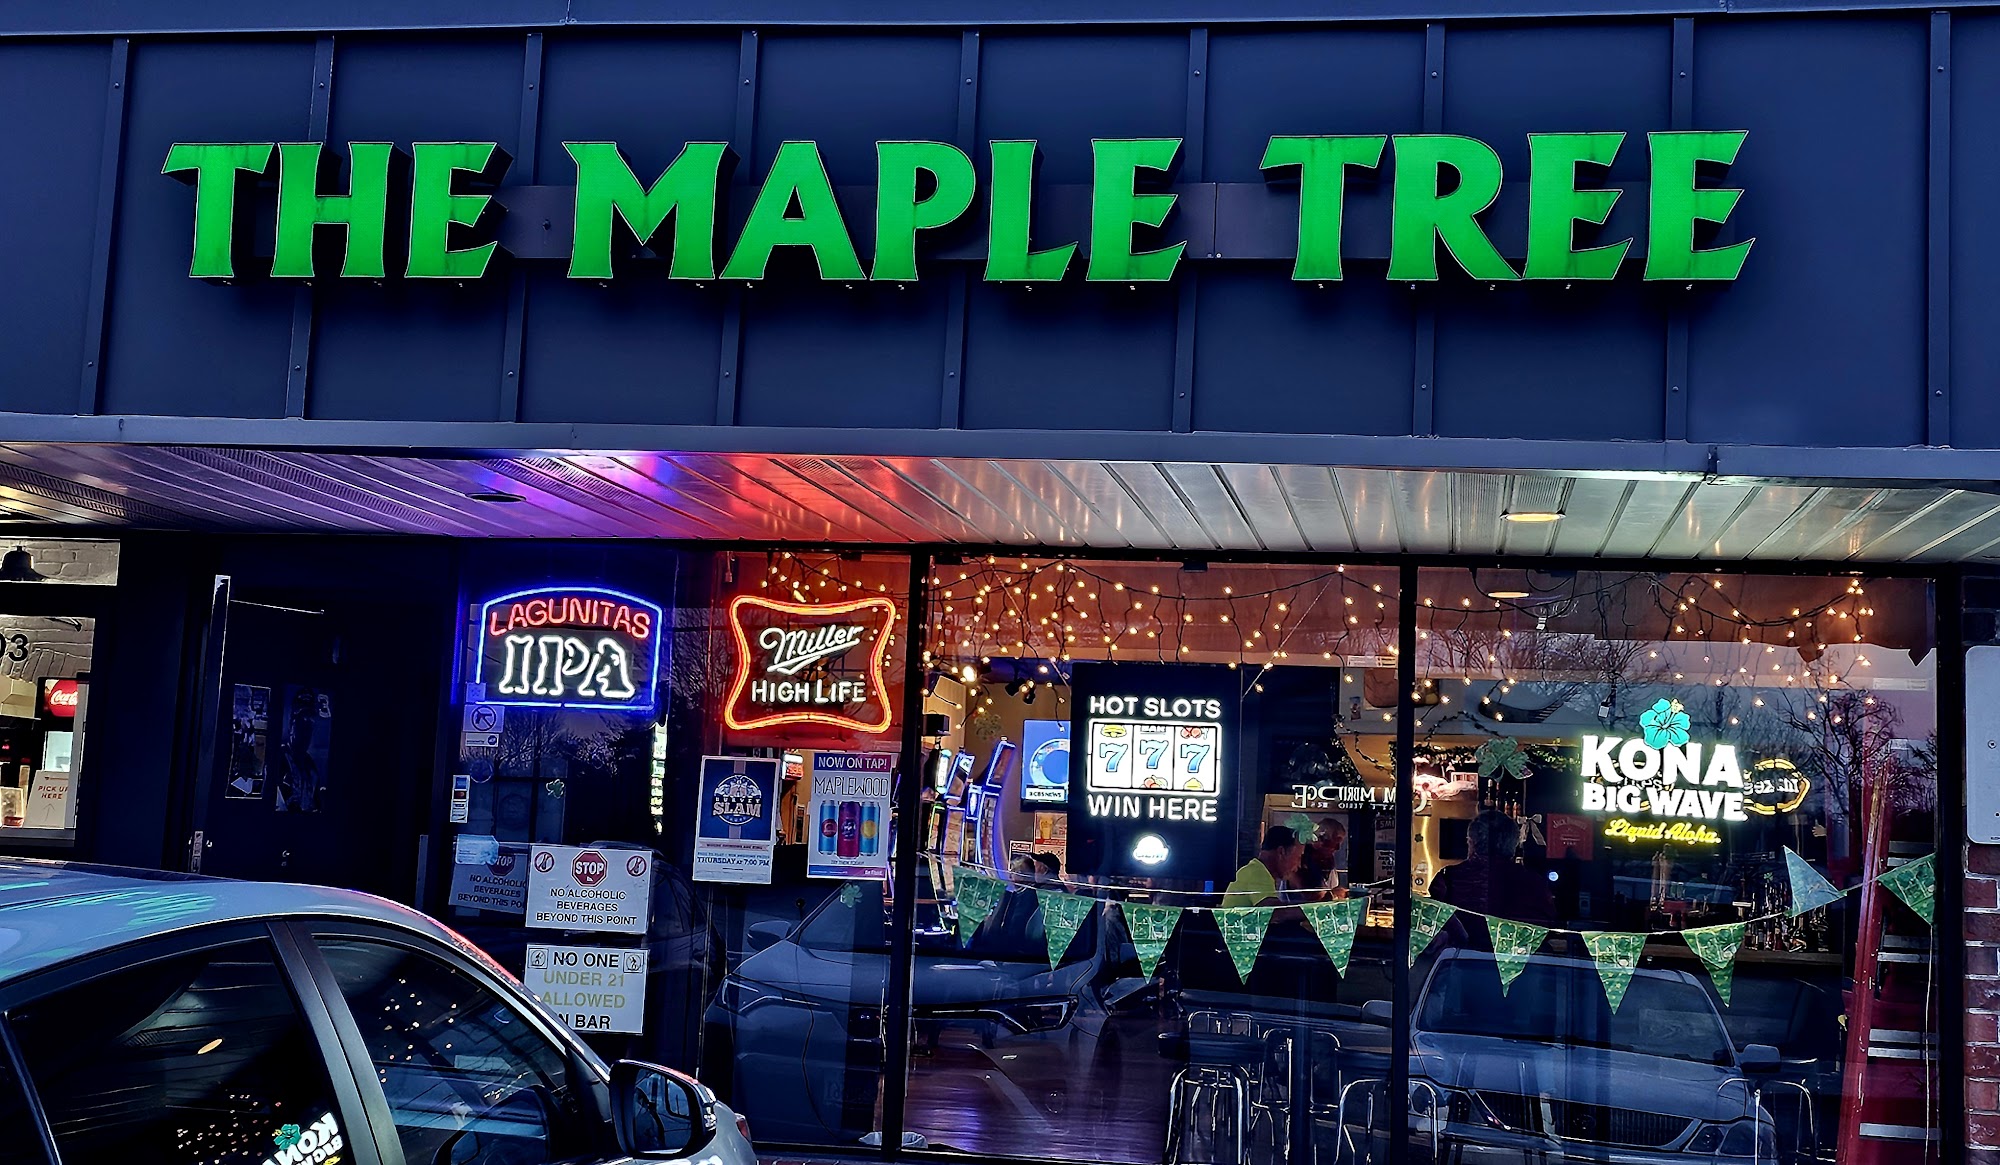 The Maple Tree Tap